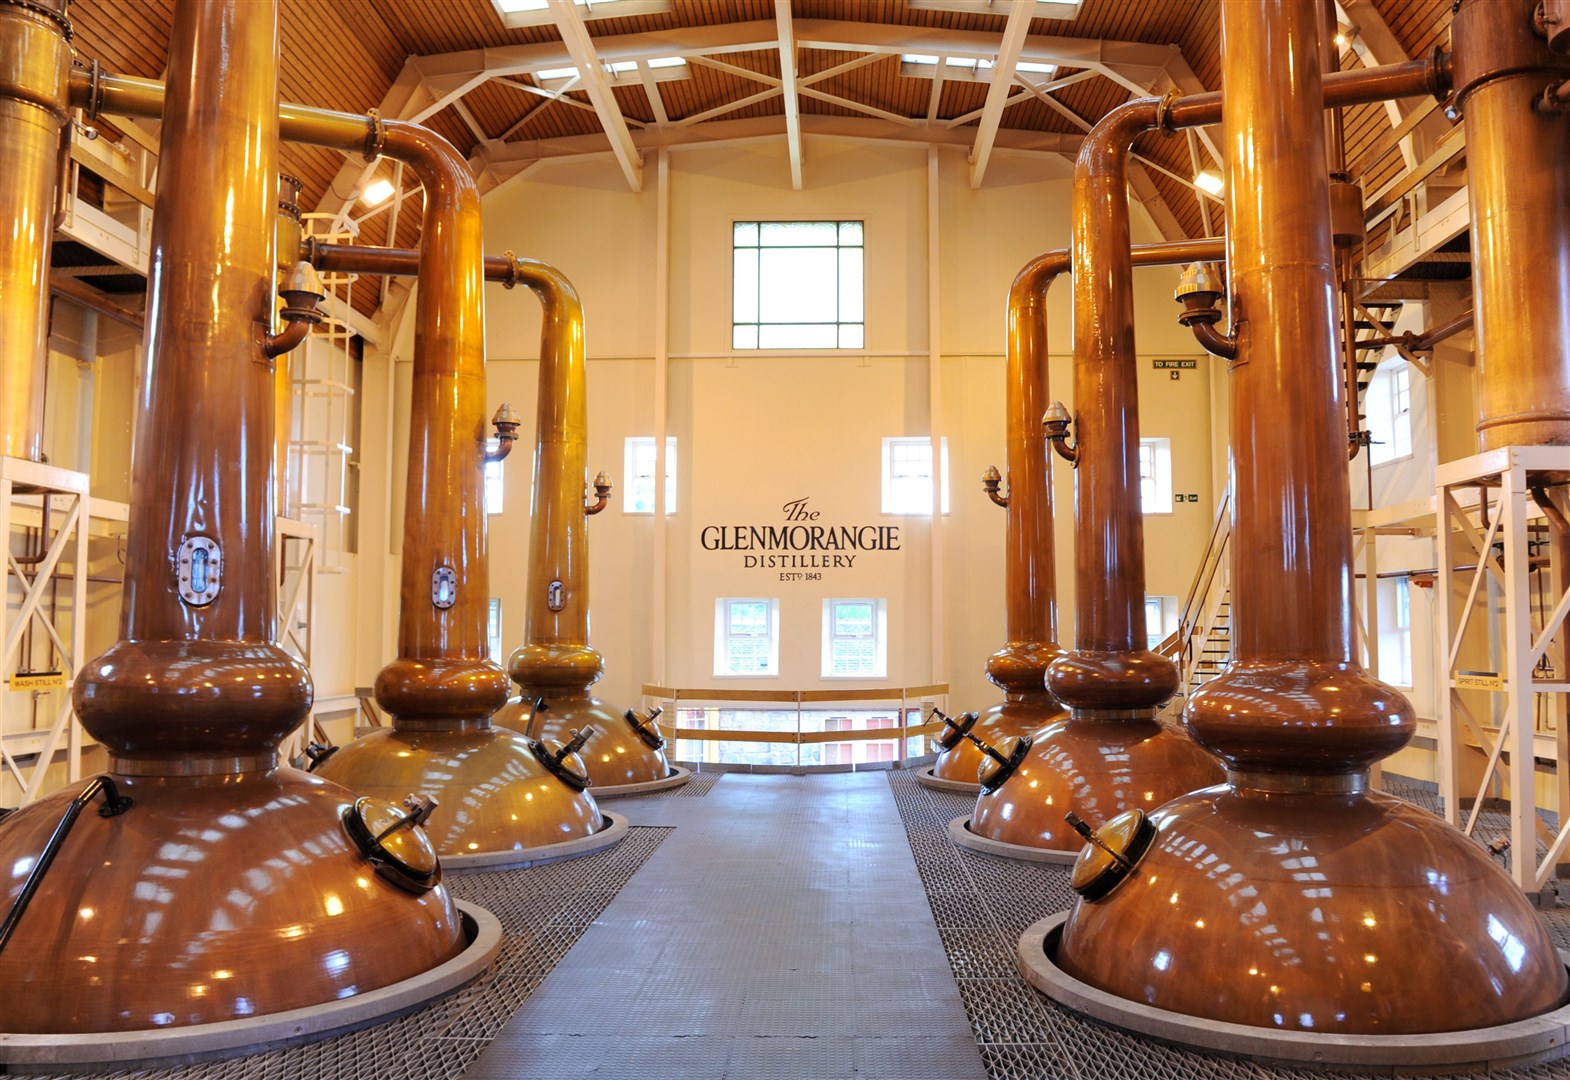 The whisky industry is a significant part of Ross-shire's economy with several distilleries across the county, amongst them Glen Ord in Muir of Ord and Glenmorangie in Tain.